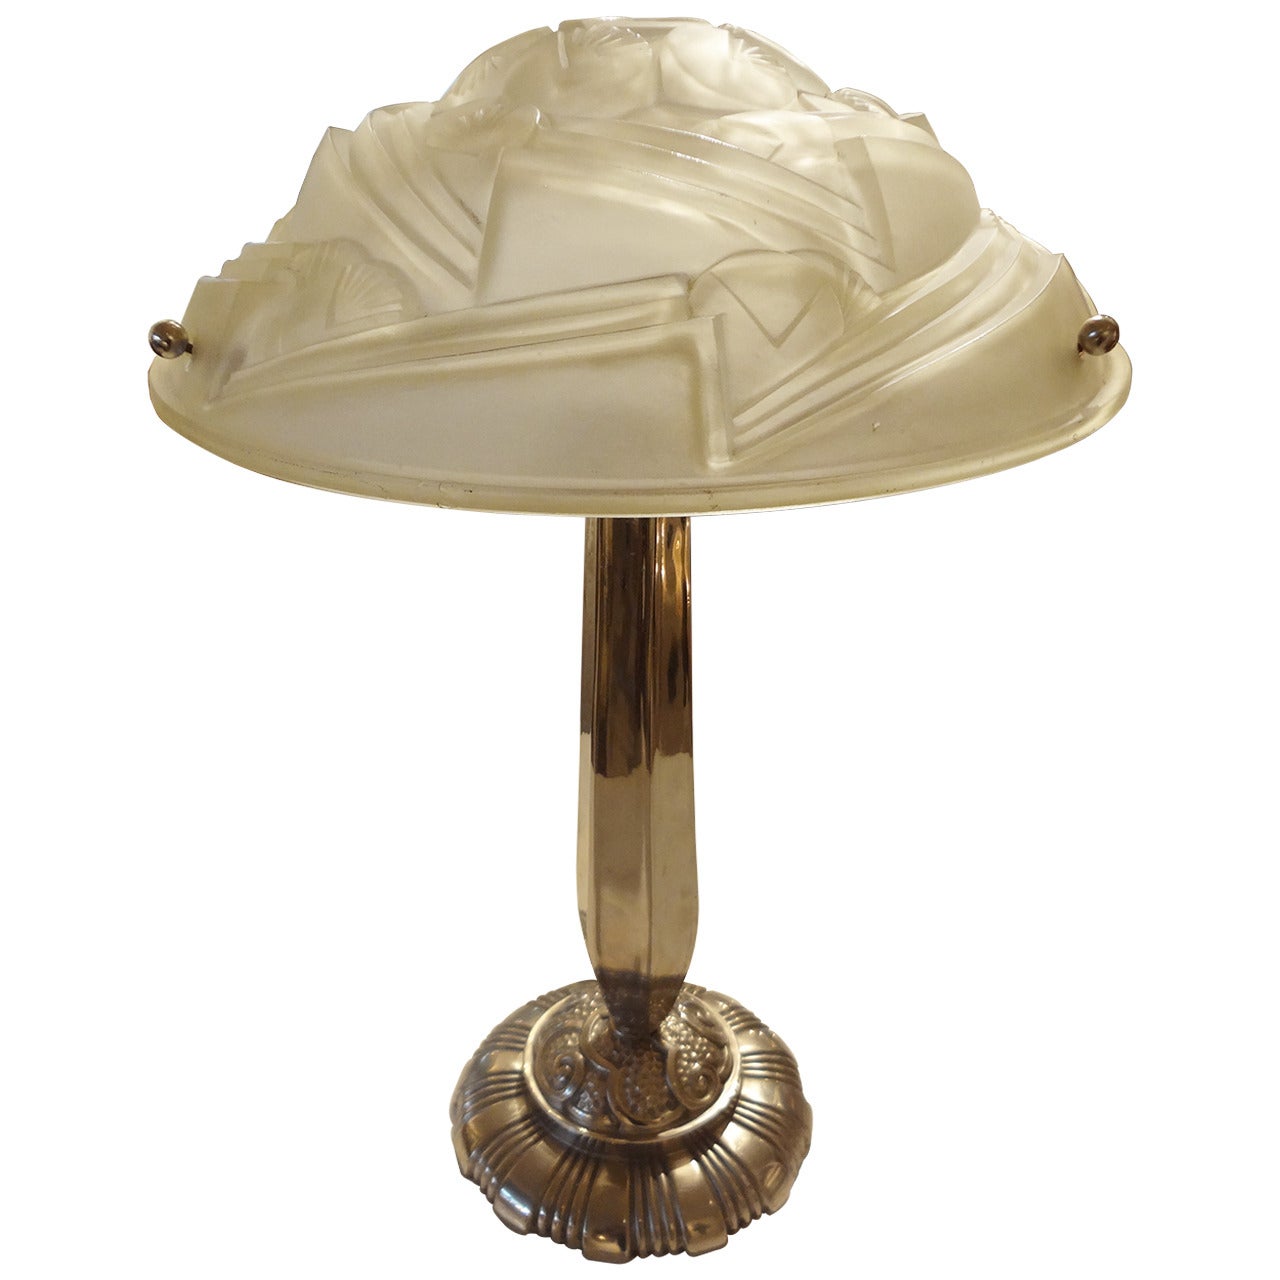 French Art Deco Nickeled Bronze And Glass Table Lamp, Circa 1930